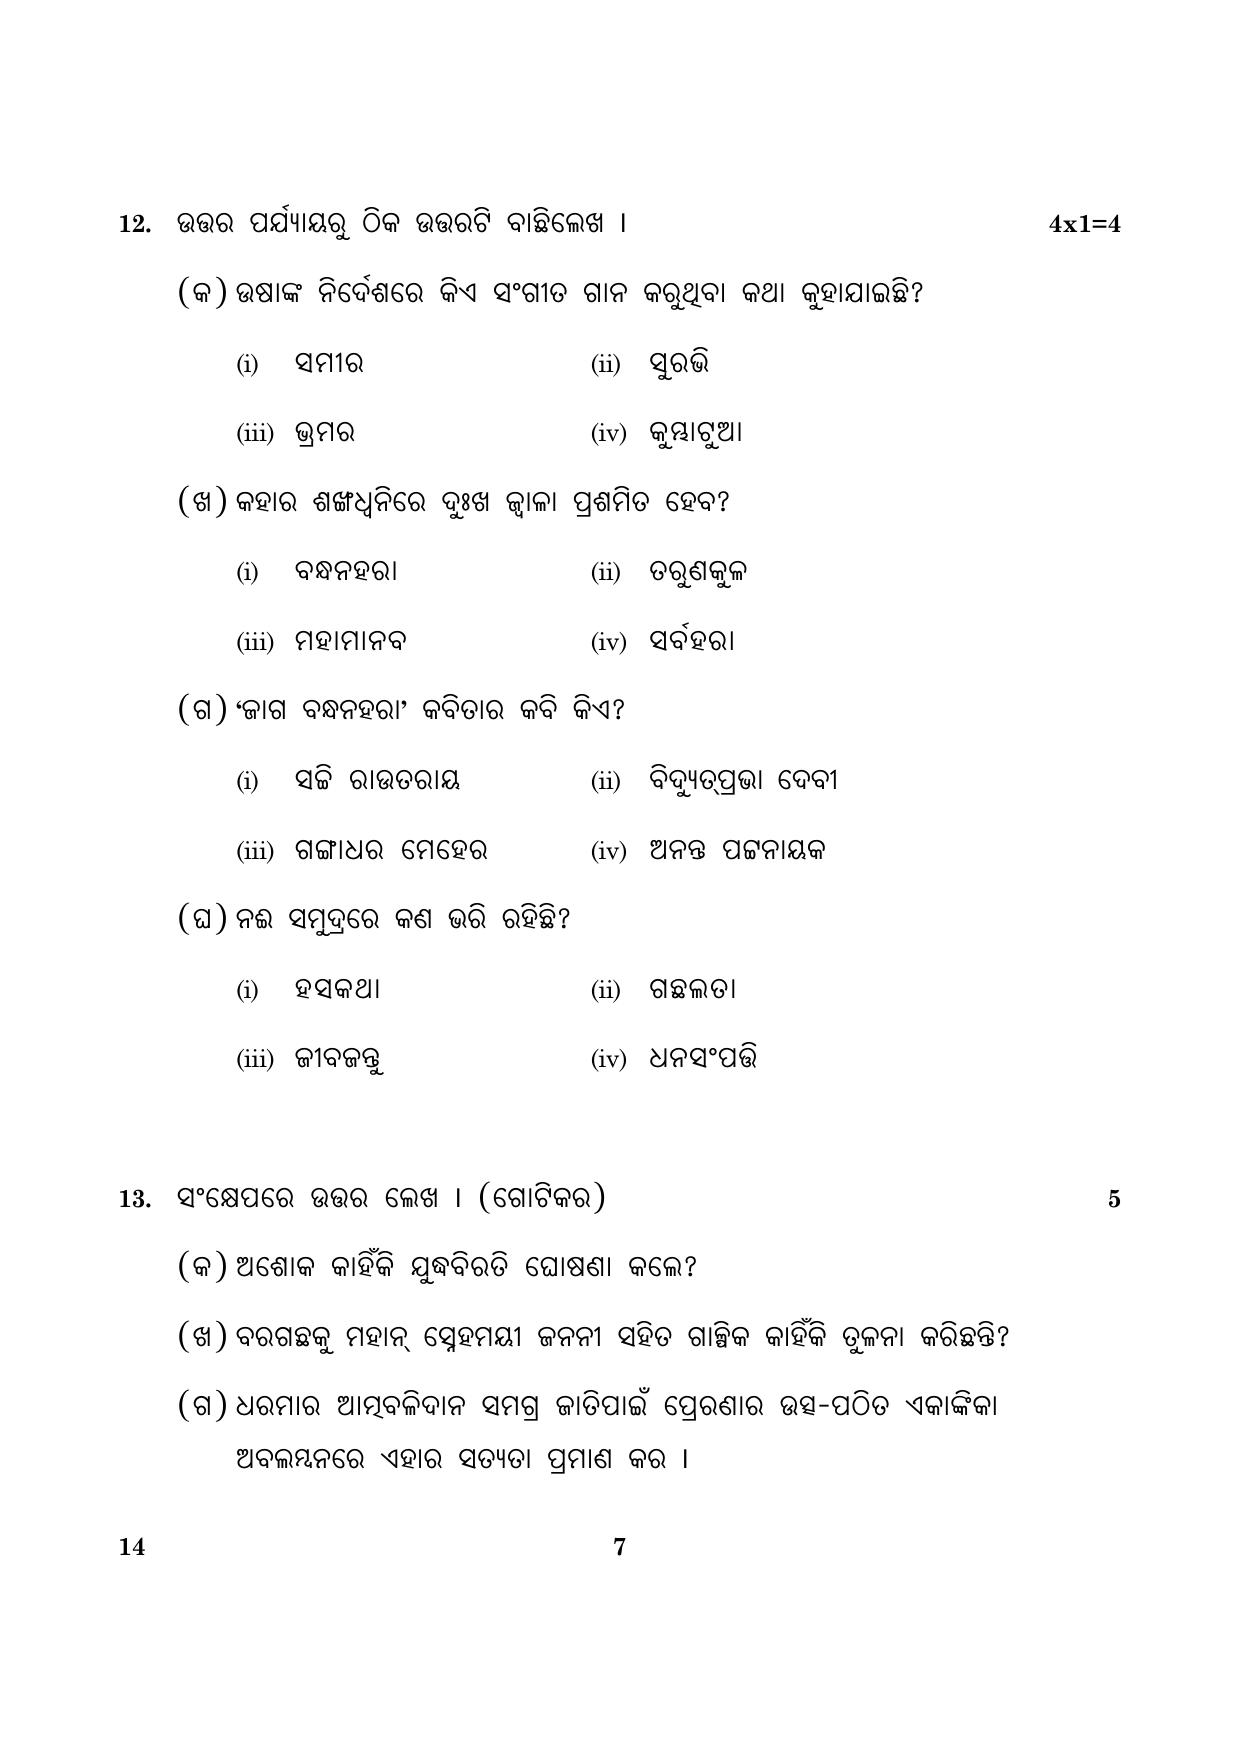 CBSE Class 10 014 Odia 2016 Question Paper - Page 7